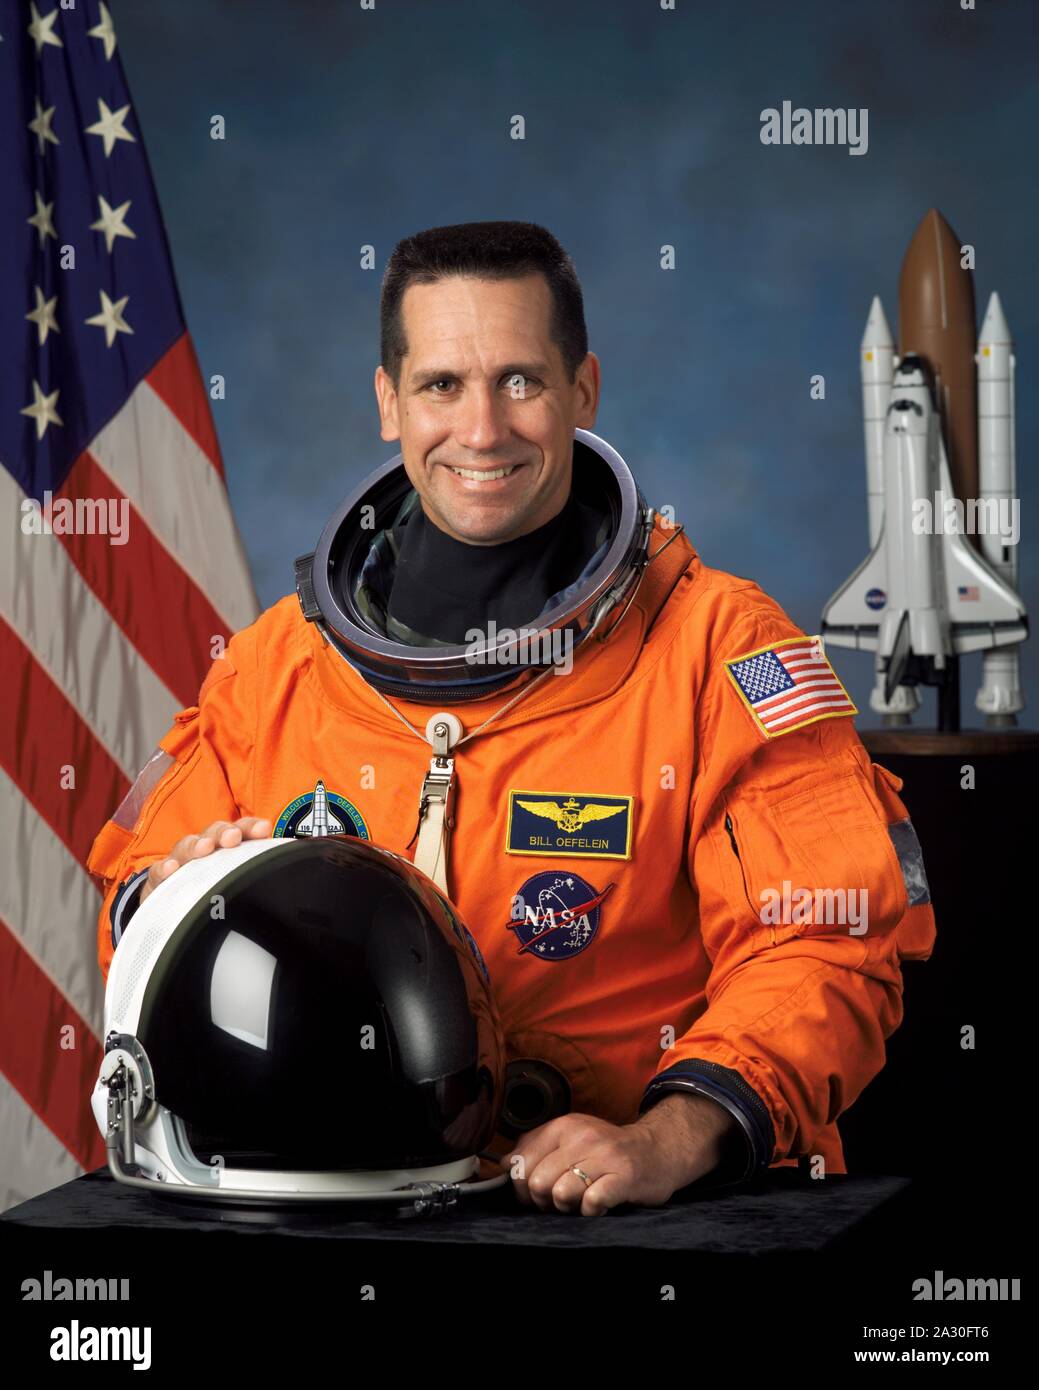 ***FILE PHOTO*** Archive Image relating to the film, Lucy In The Sky, loosely based on the events surrounding the love triangle involving Astronaut Lisa Nowak.  FILE: In this photo released by NASA, this is the official portrait of Commander William A. Oefelein, United States Navy, pilot, STS-116 Discovery from December 9 to 22, 2006 taken on April 16, 2003. The seven-member crew on this 12-day mission continued construction of the ISS outpost by adding the P5 spacer truss segment during the first of four spacewalks. Mission duration was 12 days, 20 hours and 45 minutes. Credit: NASA via CNP / Stock Photo